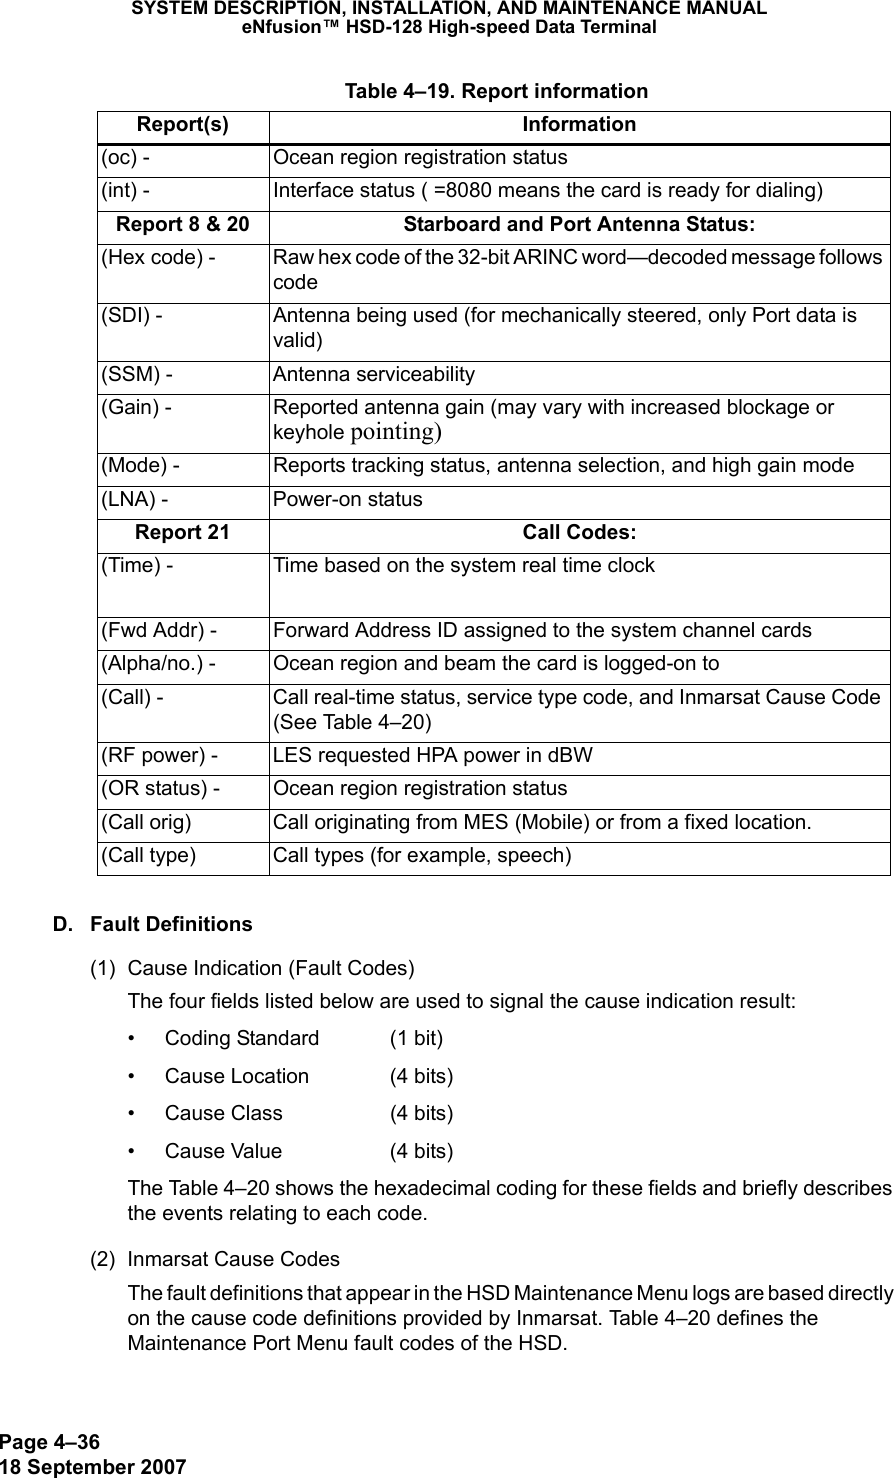 Page 4–3618 September 2007SYSTEM DESCRIPTION, INSTALLATION, AND MAINTENANCE MANUALeNfusion™ HSD-128 High-speed Data TerminalD. Fault Definitions(1) Cause Indication (Fault Codes)The four fields listed below are used to signal the cause indication result:• Coding Standard  (1 bit)• Cause Location  (4 bits)• Cause Class  (4 bits)• Cause Value  (4 bits)The Table 4–20 shows the hexadecimal coding for these fields and briefly describes the events relating to each code. (2) Inmarsat Cause CodesThe fault definitions that appear in the HSD Maintenance Menu logs are based directly on the cause code definitions provided by Inmarsat. Table 4–20 defines the Maintenance Port Menu fault codes of the HSD.(oc) - Ocean region registration status(int) - Interface status ( =8080 means the card is ready for dialing)Report 8 &amp; 20 Starboard and Port Antenna Status:(Hex code) - Raw hex code of the 32-bit ARINC word—decoded message follows code(SDI) - Antenna being used (for mechanically steered, only Port data is valid)(SSM) - Antenna serviceability(Gain) - Reported antenna gain (may vary with increased blockage or keyhole pointing)(Mode) - Reports tracking status, antenna selection, and high gain mode (LNA) - Power-on statusReport 21 Call Codes:(Time) - Time based on the system real time clock(Fwd Addr) - Forward Address ID assigned to the system channel cards(Alpha/no.) - Ocean region and beam the card is logged-on to(Call) - Call real-time status, service type code, and Inmarsat Cause Code (See Table 4–20)(RF power) - LES requested HPA power in dBW(OR status) - Ocean region registration status(Call orig) Call originating from MES (Mobile) or from a fixed location.(Call type) Call types (for example, speech) Table 4–19. Report informationReport(s) Information